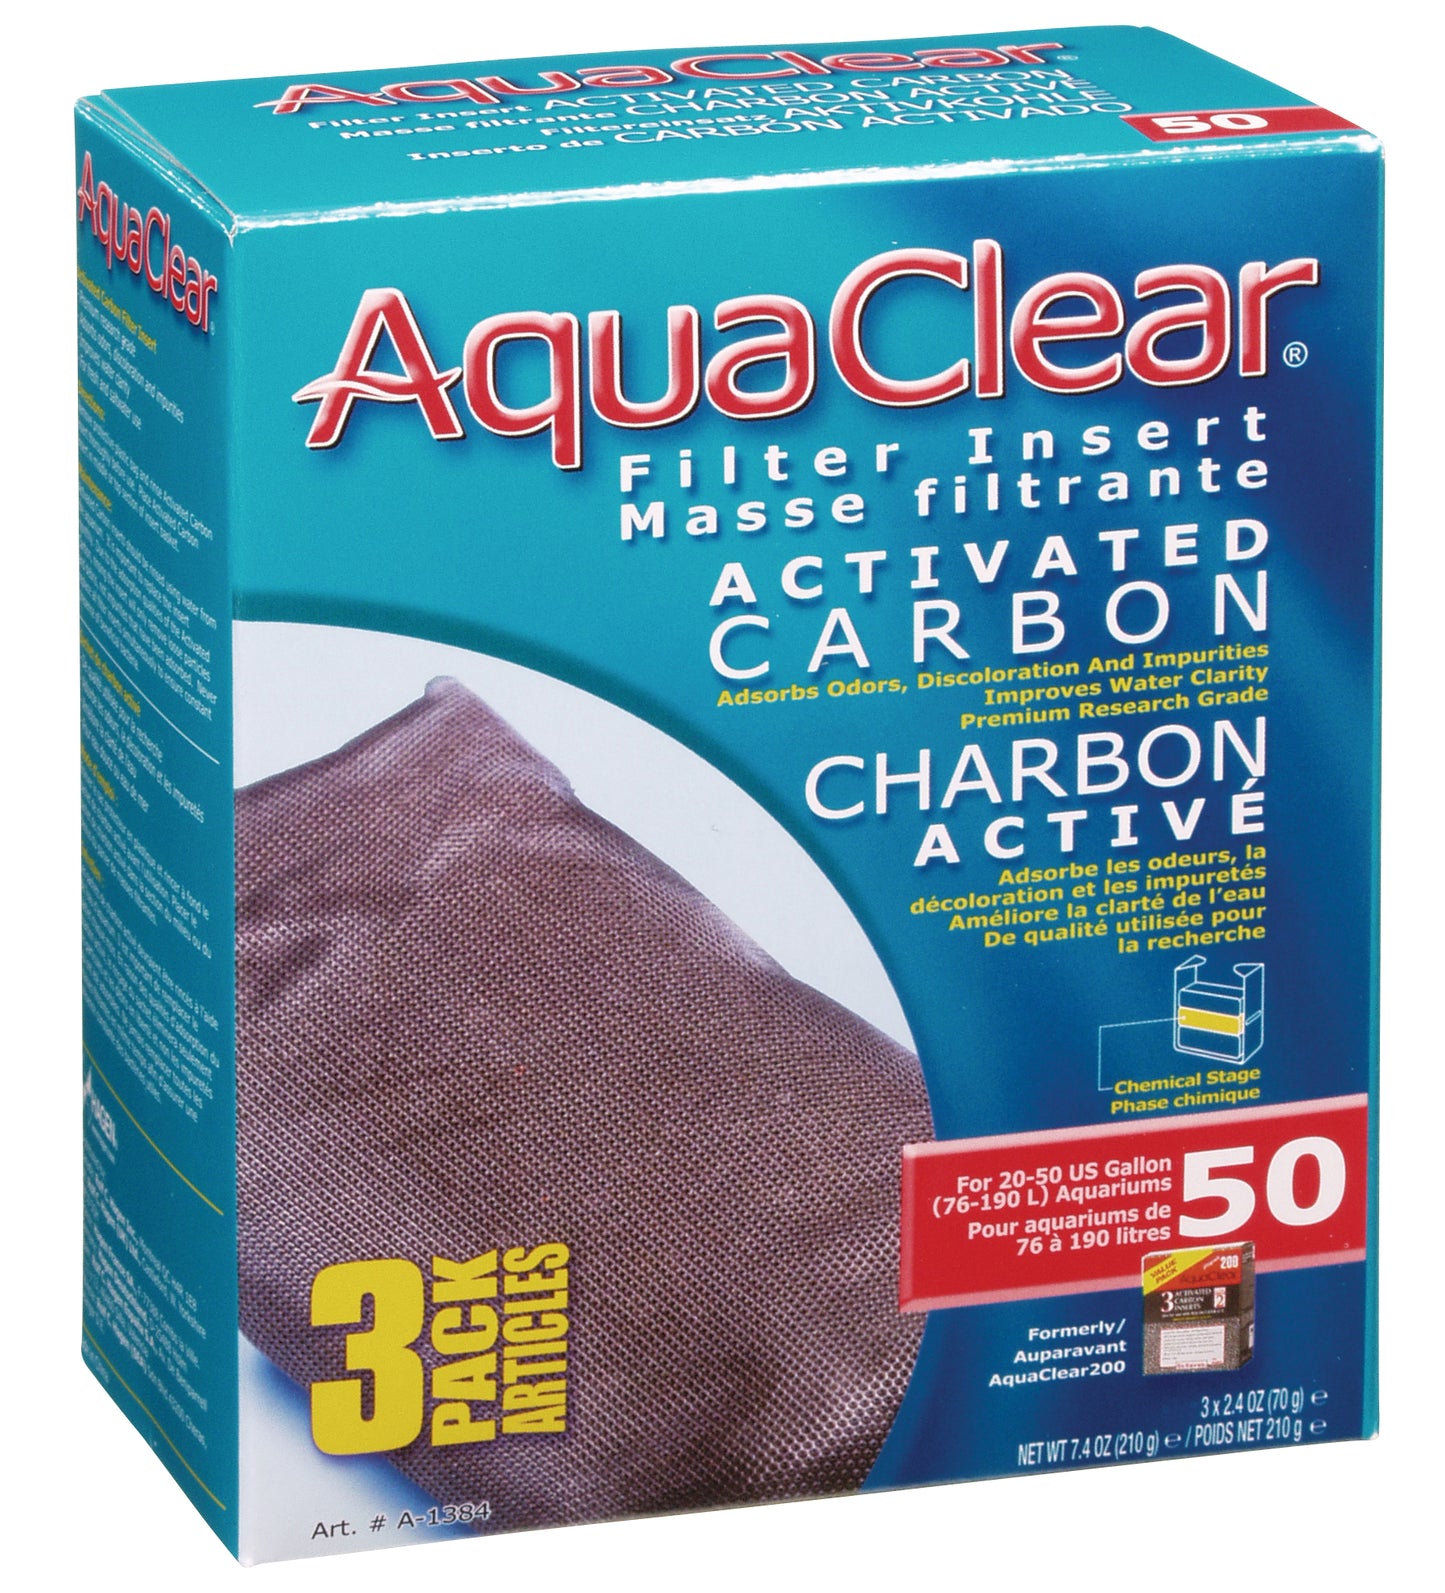 AquaClear 50 Activated Carbon Filter Insert, 3-Pack